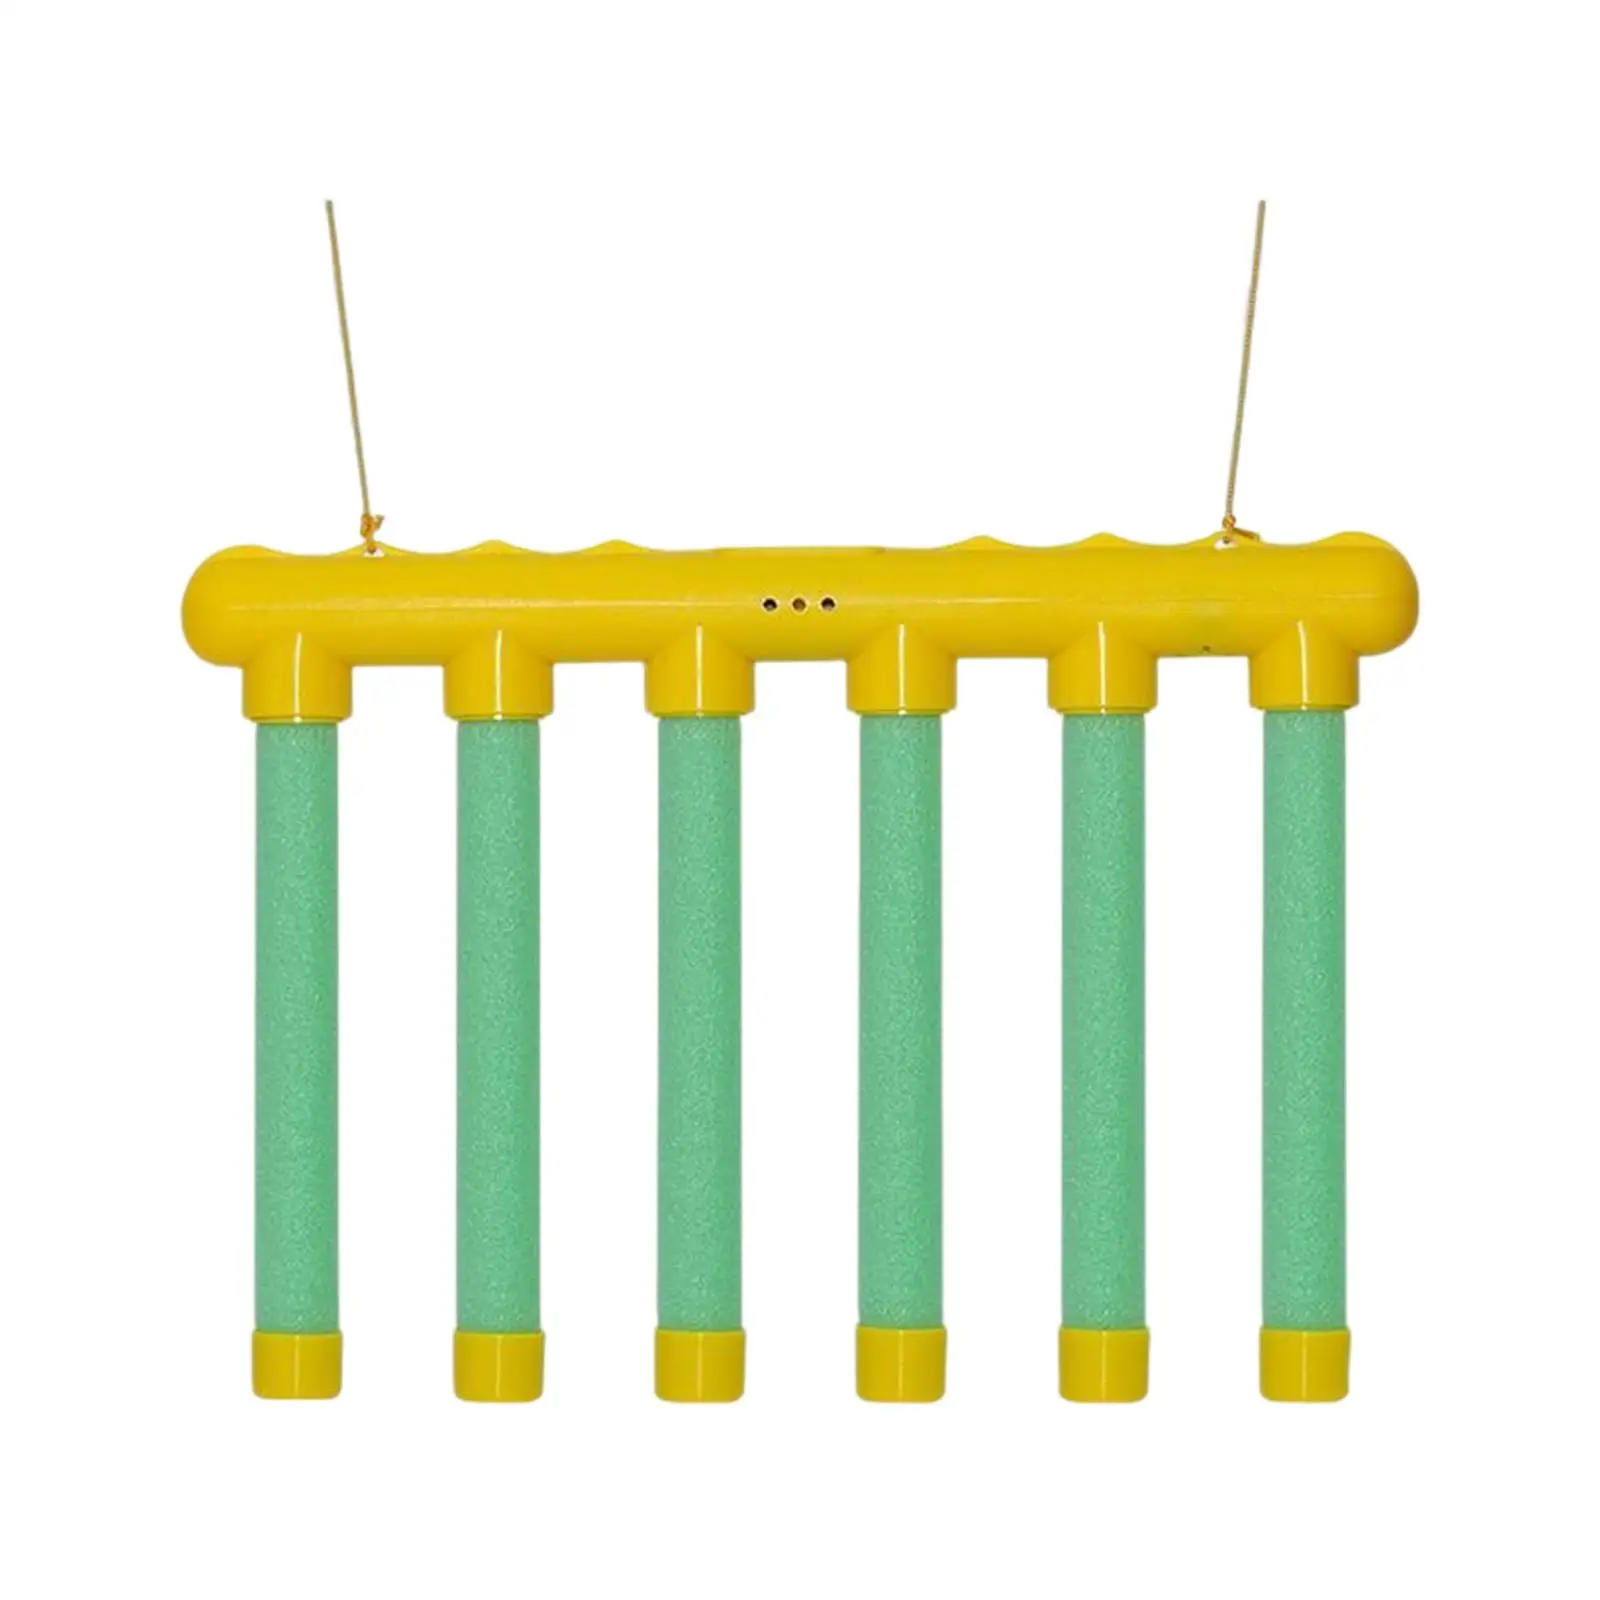 Reaction Training Toy Stick Catcher Catching Games for Boys Girls Exercise